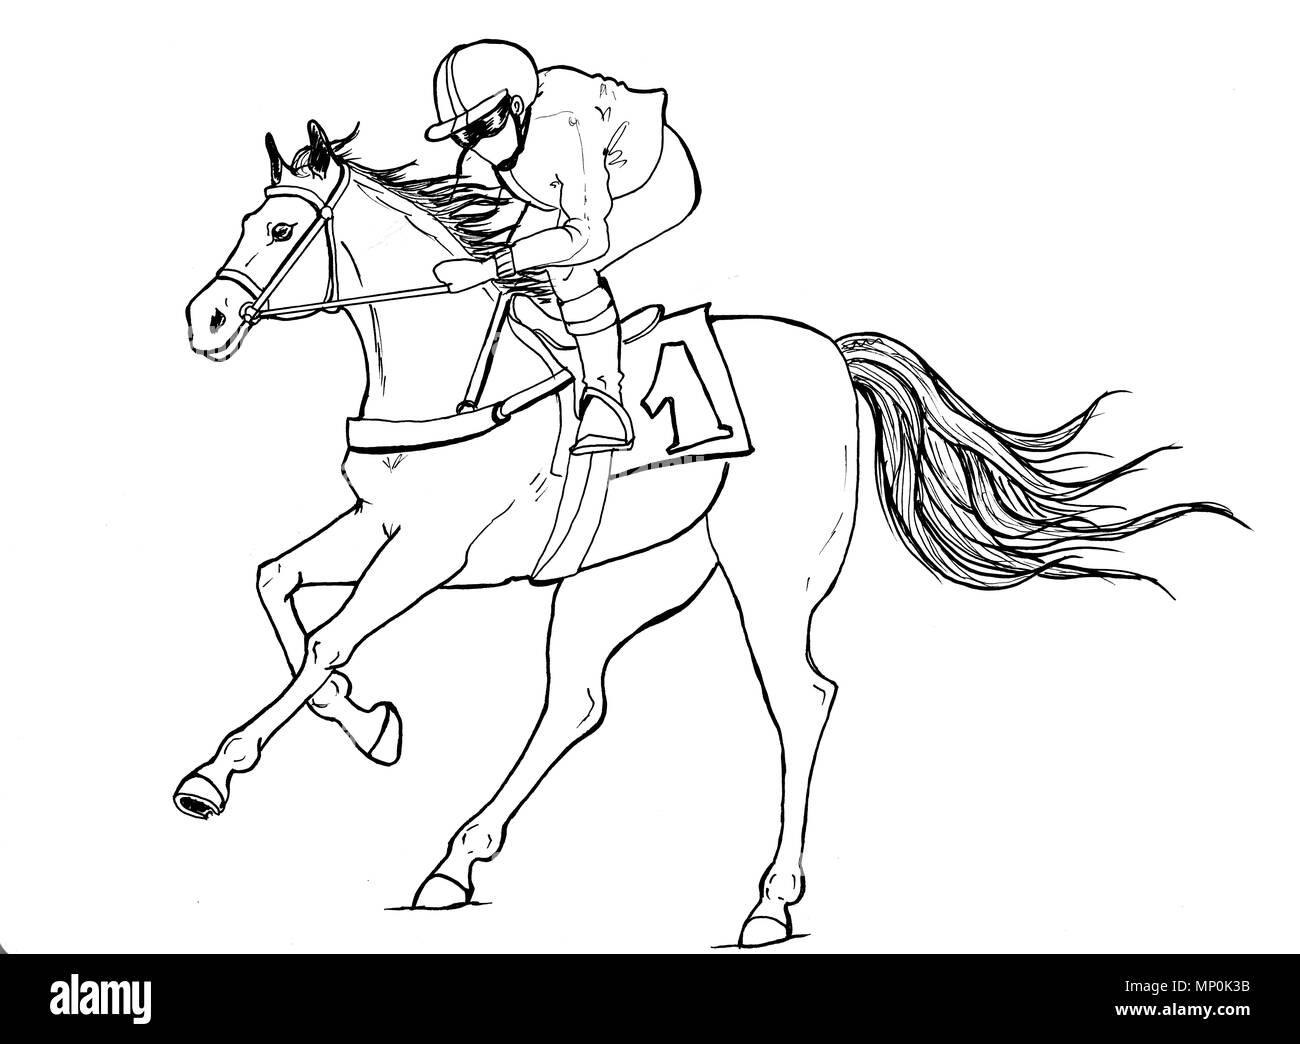 Horses pencil drawn races hore in gallop motion. Animal design. Stock Photo